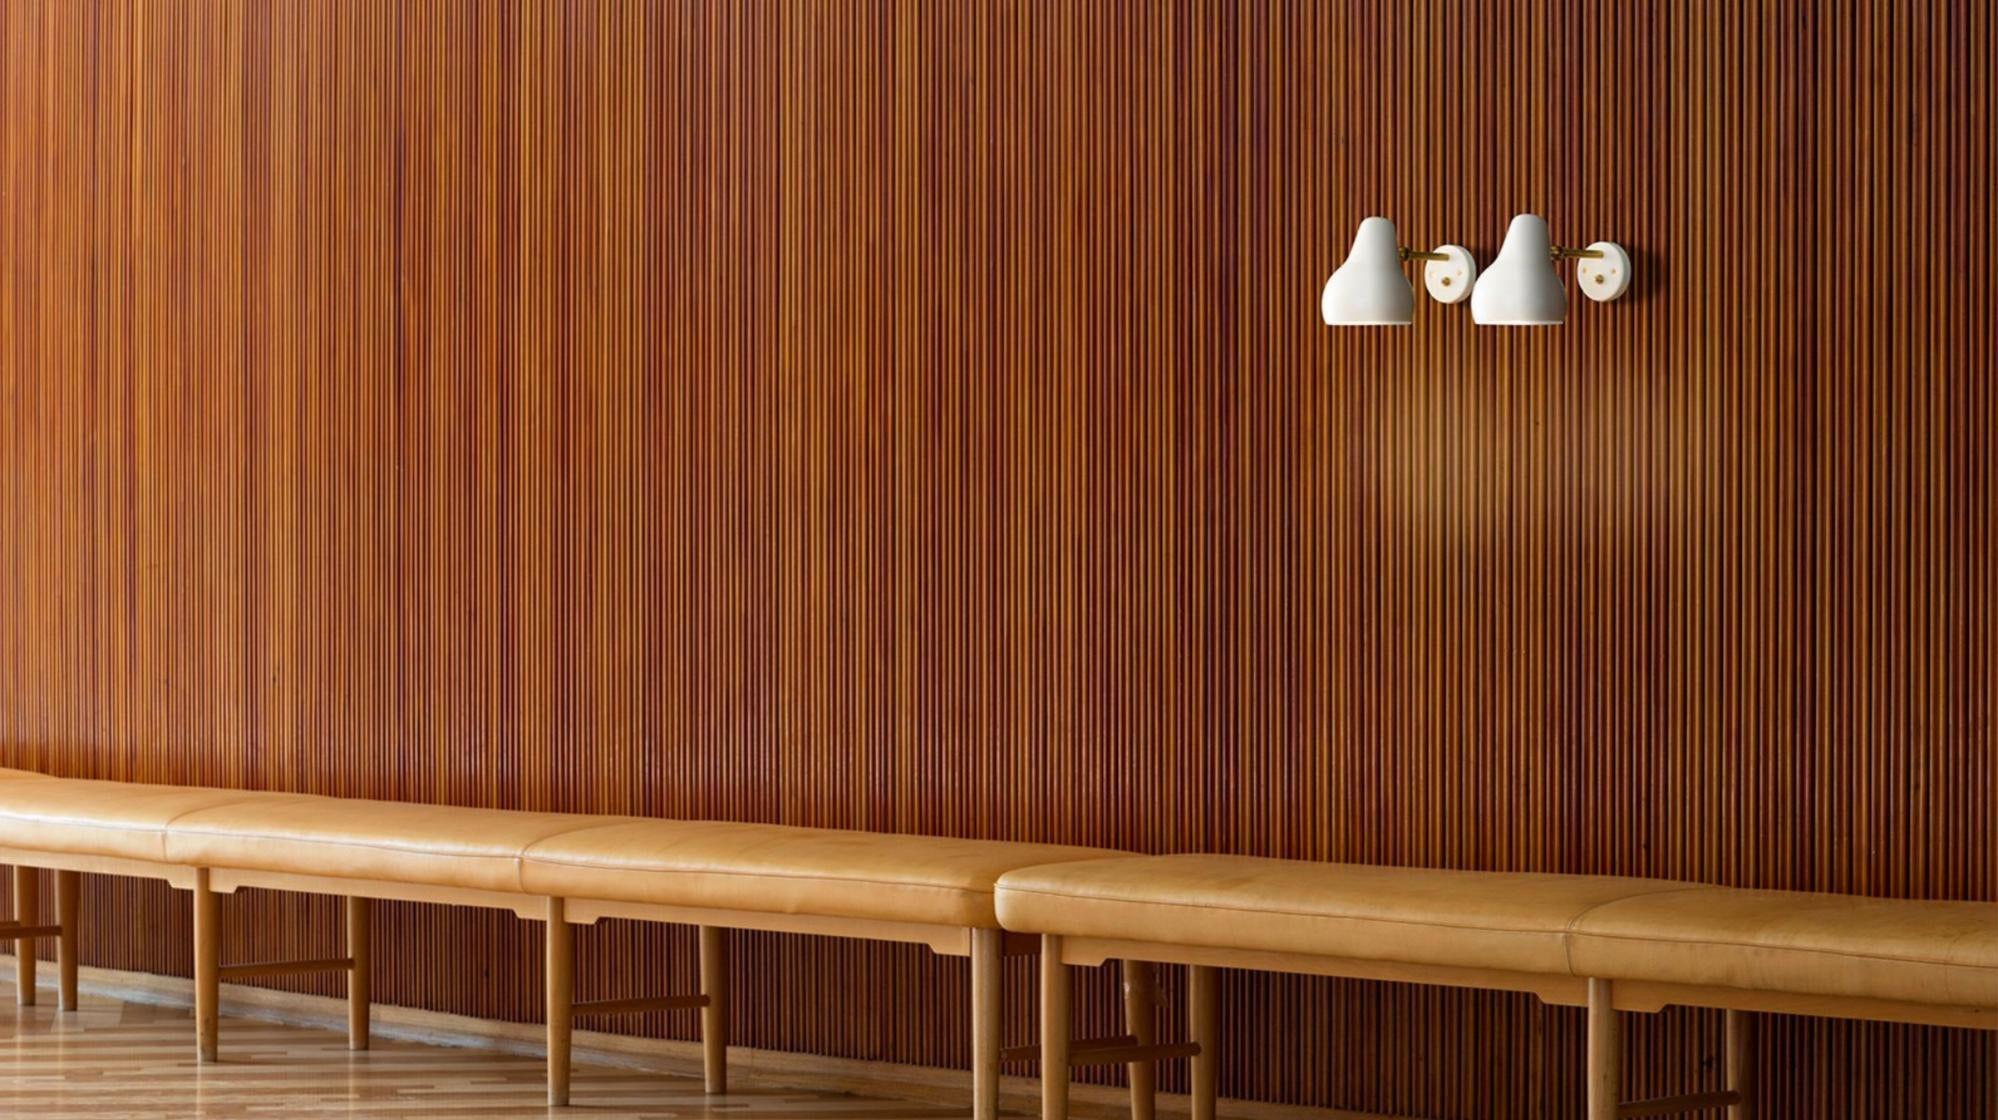 Vilhelm Lauritzen 'Radiohus' sconces for Louis Poulsen. Originally designed in the 1930s by Vilhelm Lauritzen in partnership with Louis Poulsen for the construction of the Radiohuset building in Copenhagen, which is now home to the Royal Danish